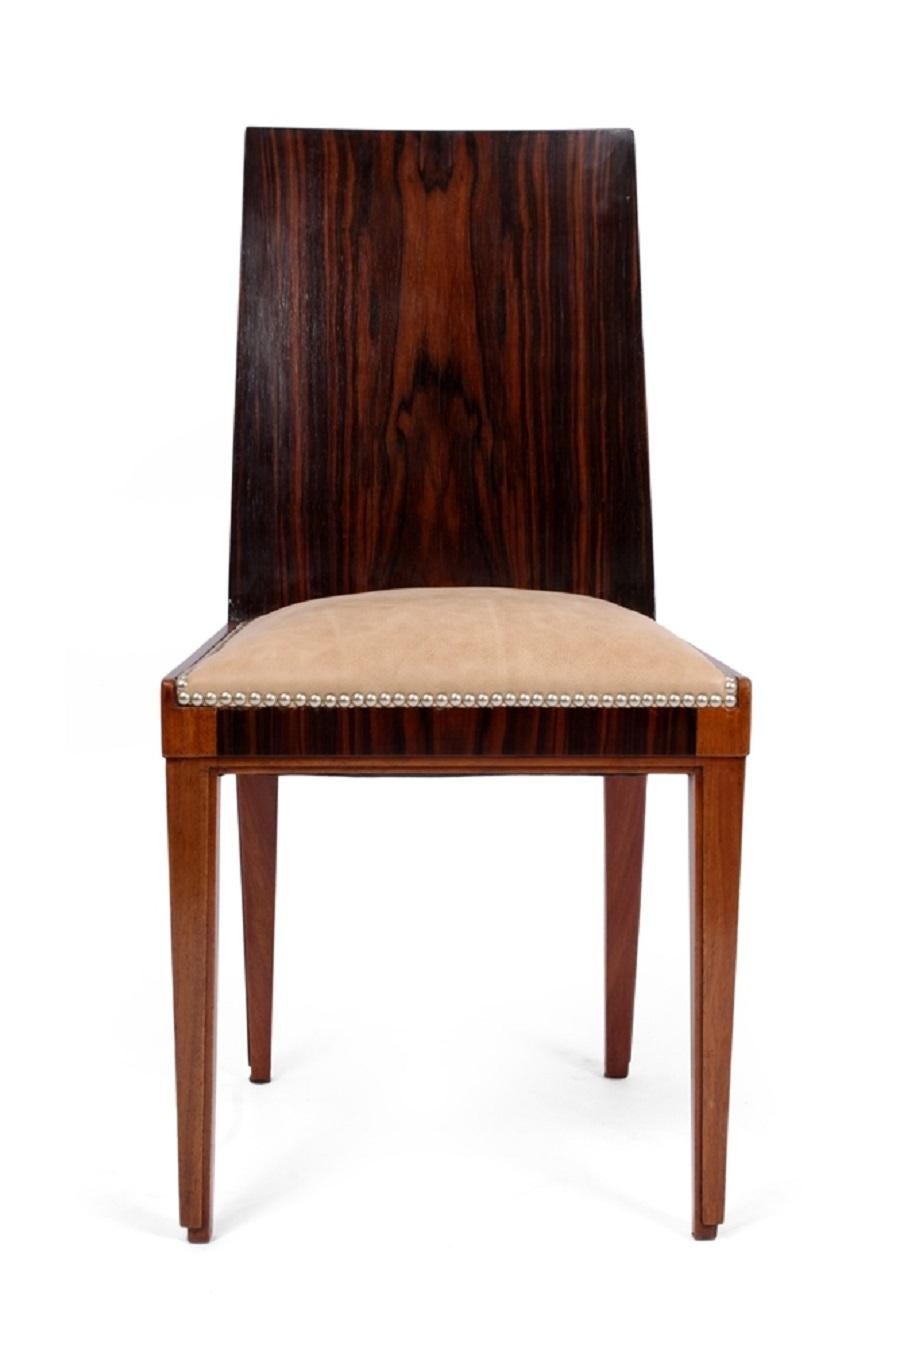 European Set of 6 French Art Deco Macassar Ebony Dining Chairs, c.1930 For Sale